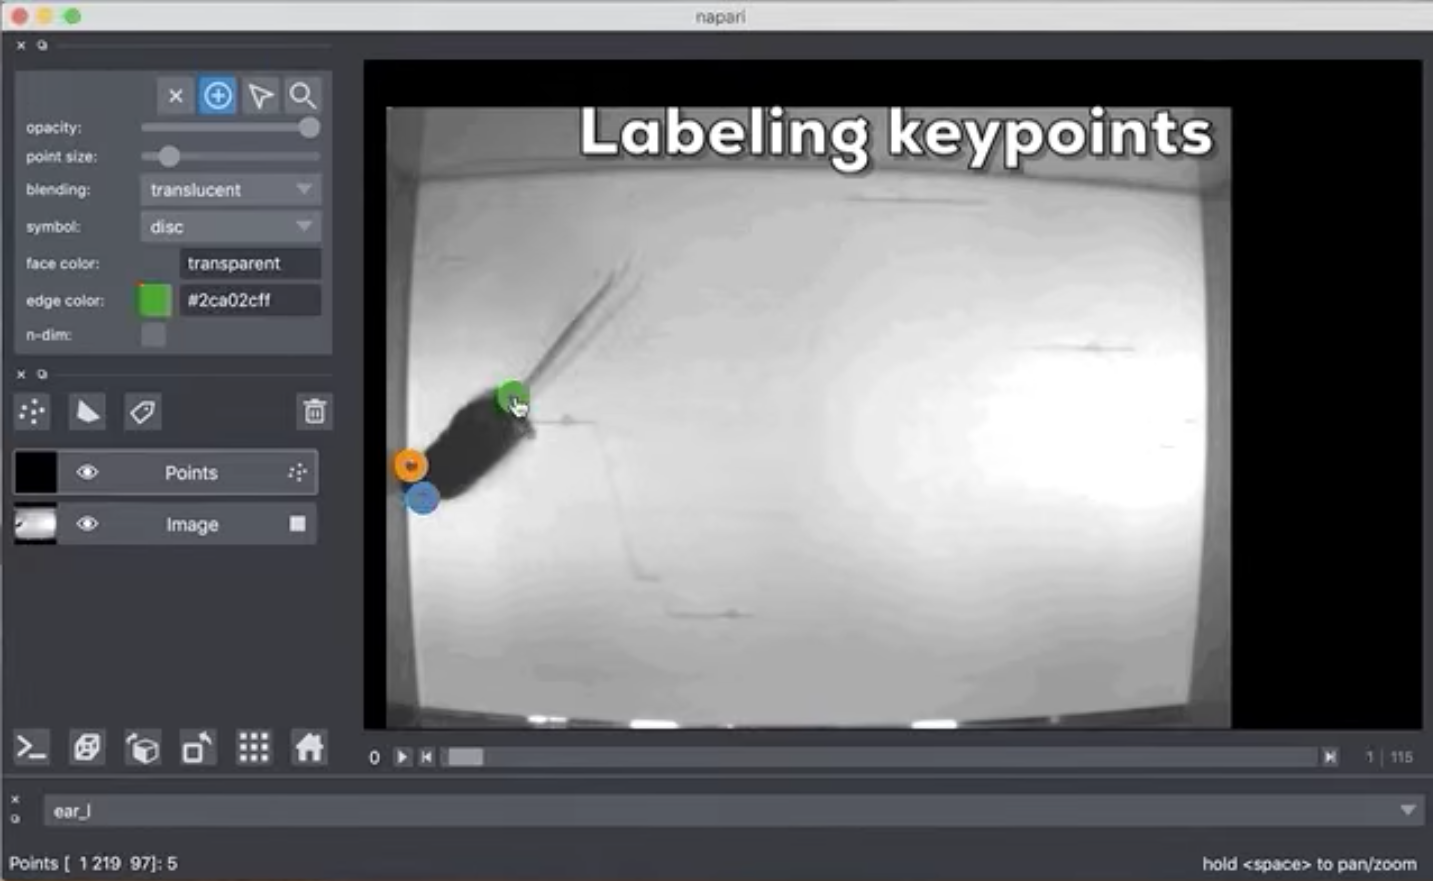 Demo of point annotator shows user adding keypoint labels to a video of a mouse, frame by frame. The user navigates the viewer mostly with keyboard shortcuts, and uses the computer mouse to click on keypoints like the mouse's ears and tail.